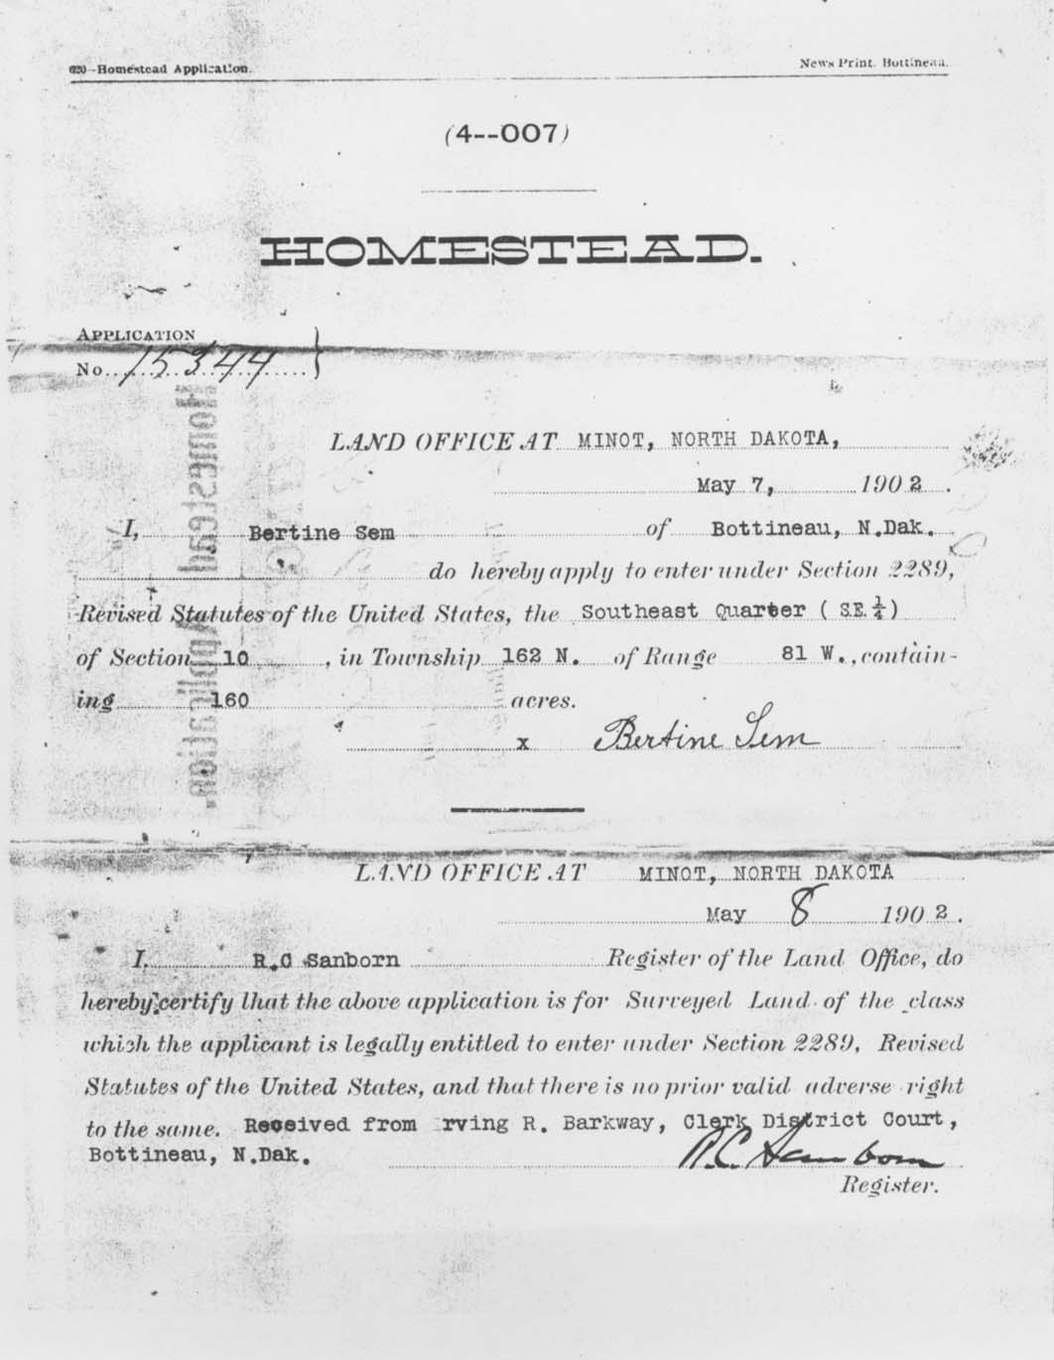 These are the papers that every homesteader had to complete in order to make a homestead claim. If the claimant could not read or write, the land office clerk could fill these out. In the first paper, Bertine Sem, the claimant, had to declare that she met all the requirements of the law to claim a quarter-section (160 acres) of the public domain. Five years later, the claimant had to file an affidavit and another form certifying that he or she had lived on the land, built a house, and raised a crop. In addition, each homesteader would ask a neighbor who was familiar with their improvements to go to the land office and swear an oath that the improvements had been made. Bertine Sem proved up in less than five years, so it is possible that she commuted or paid for her homestead claim in 1904. 